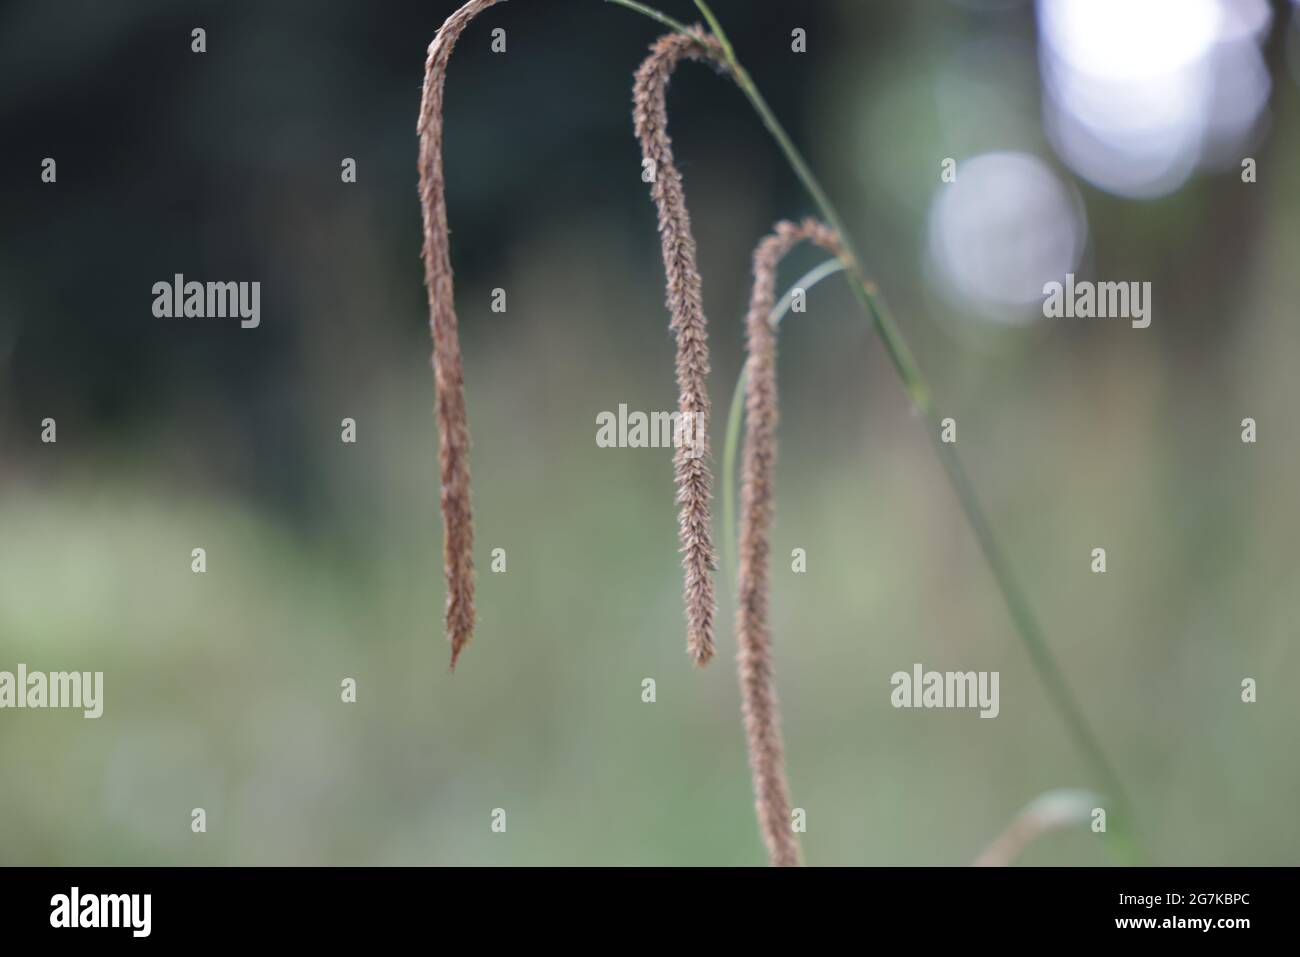 Selective focus shot of a sedge plant on a blurred background Stock Photo